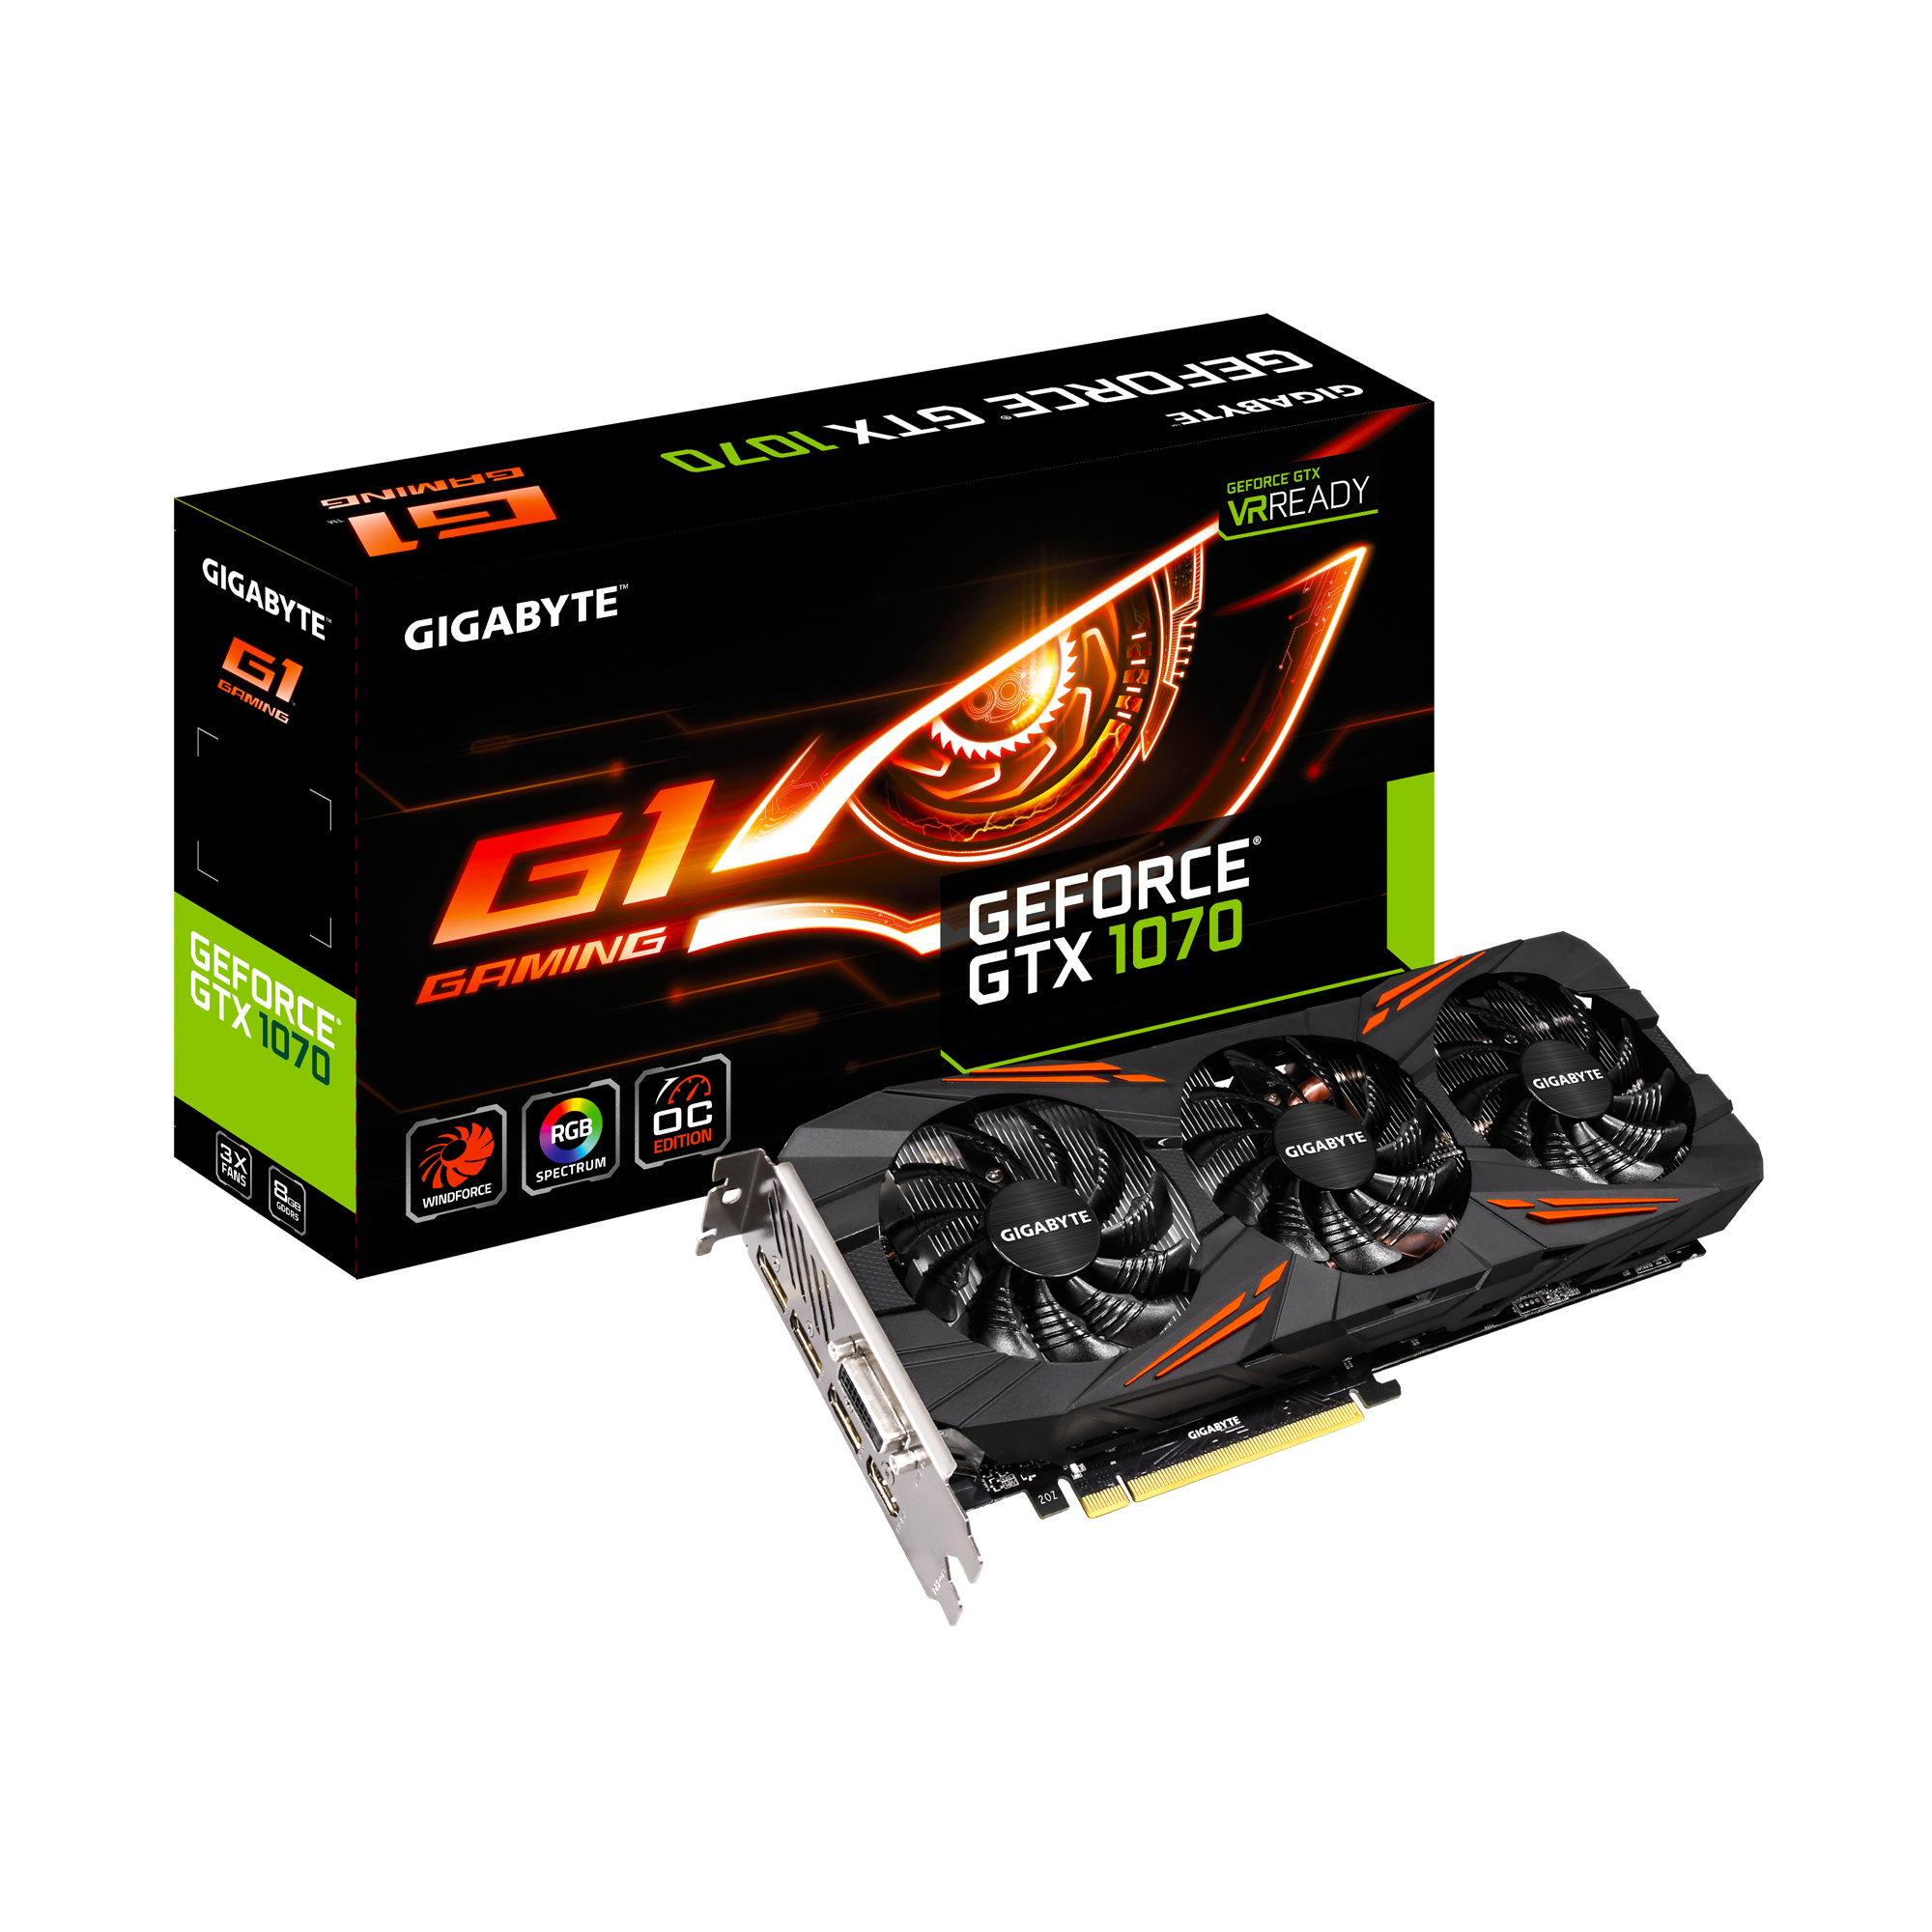 GeForce® GTX 1070 G1 Gaming 8G (rev. 1.0) Key Features | Graphics